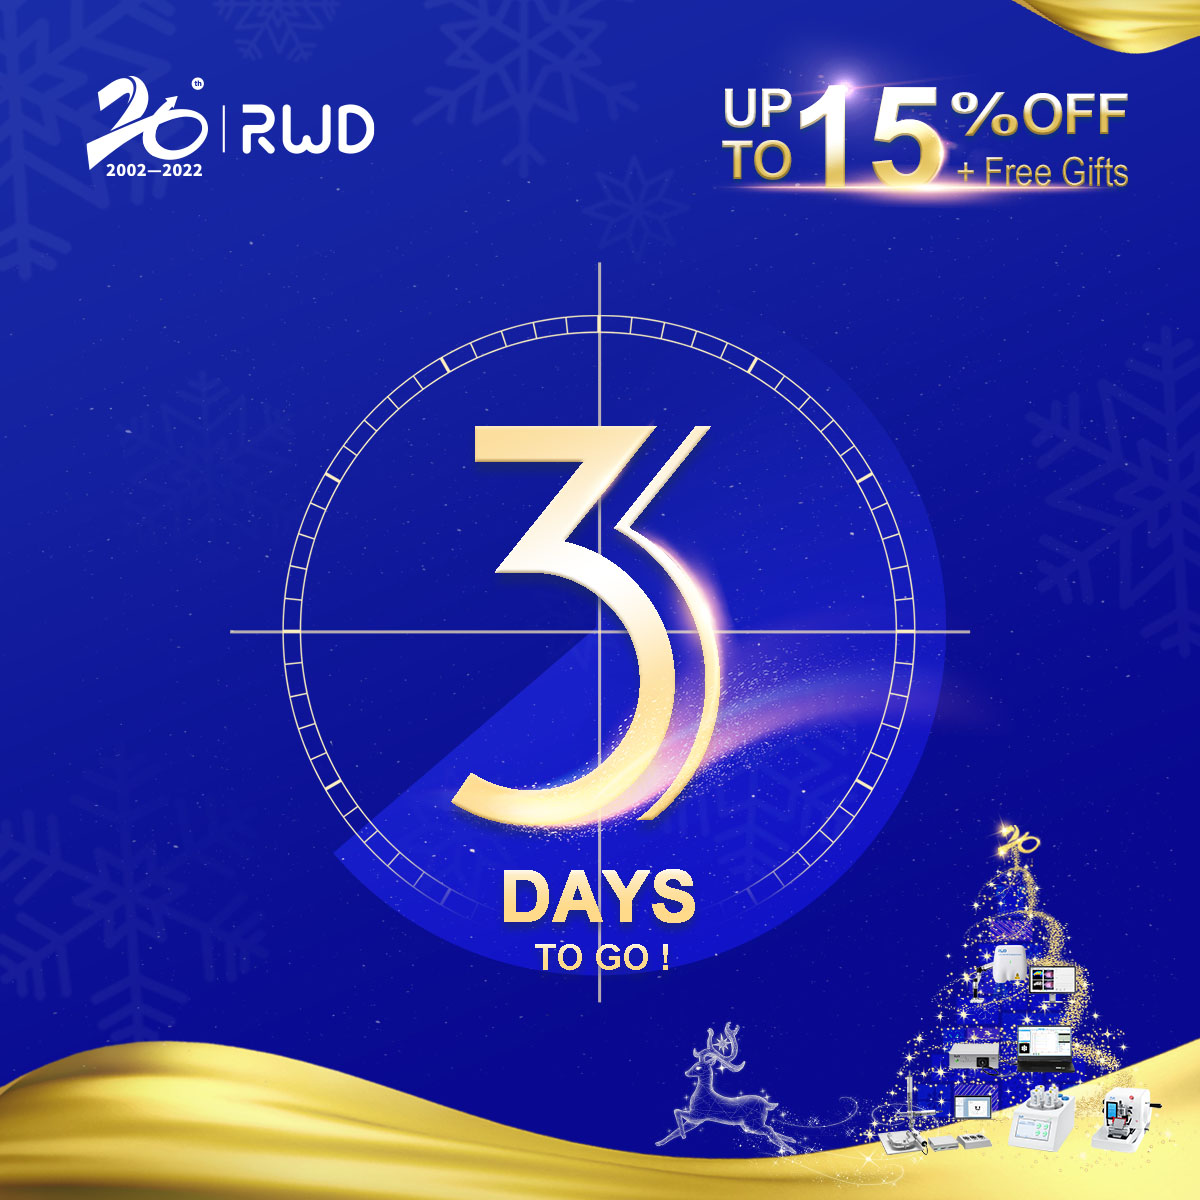 #20thAnniversaryOffer
Countdown! Only 3 days left for the SpecialOffer!!
Up to 15% off on lab equipment.😘 🎉
Catch the LAST CHANCE to GRAB THE DEAL 👇👇
bit.ly/3i0MxJZ
 
#LabEquipment #LaboratoryResearch #AnesthesiaMachine #StereotaxicSurgery #LSCI